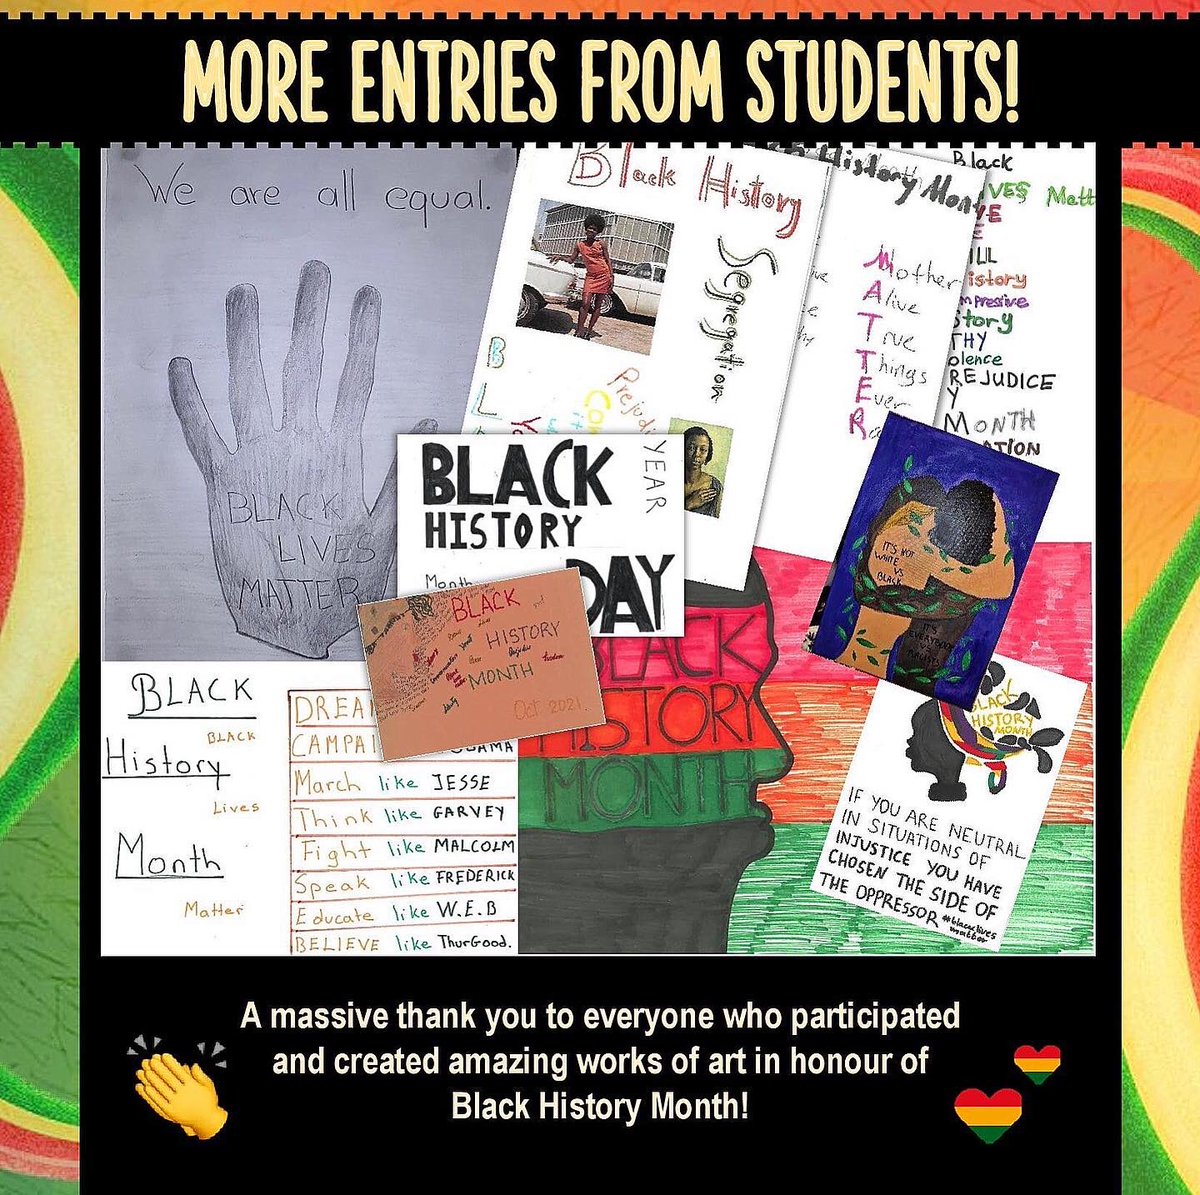 Last month we held an art competition for Black History Month! 

We are proud to present the results - swipe through to see the artwork students submitted in honour of Black History Month! 

A massive thank you to everyone who got involved! 👏 

#blackhistorymonth2021